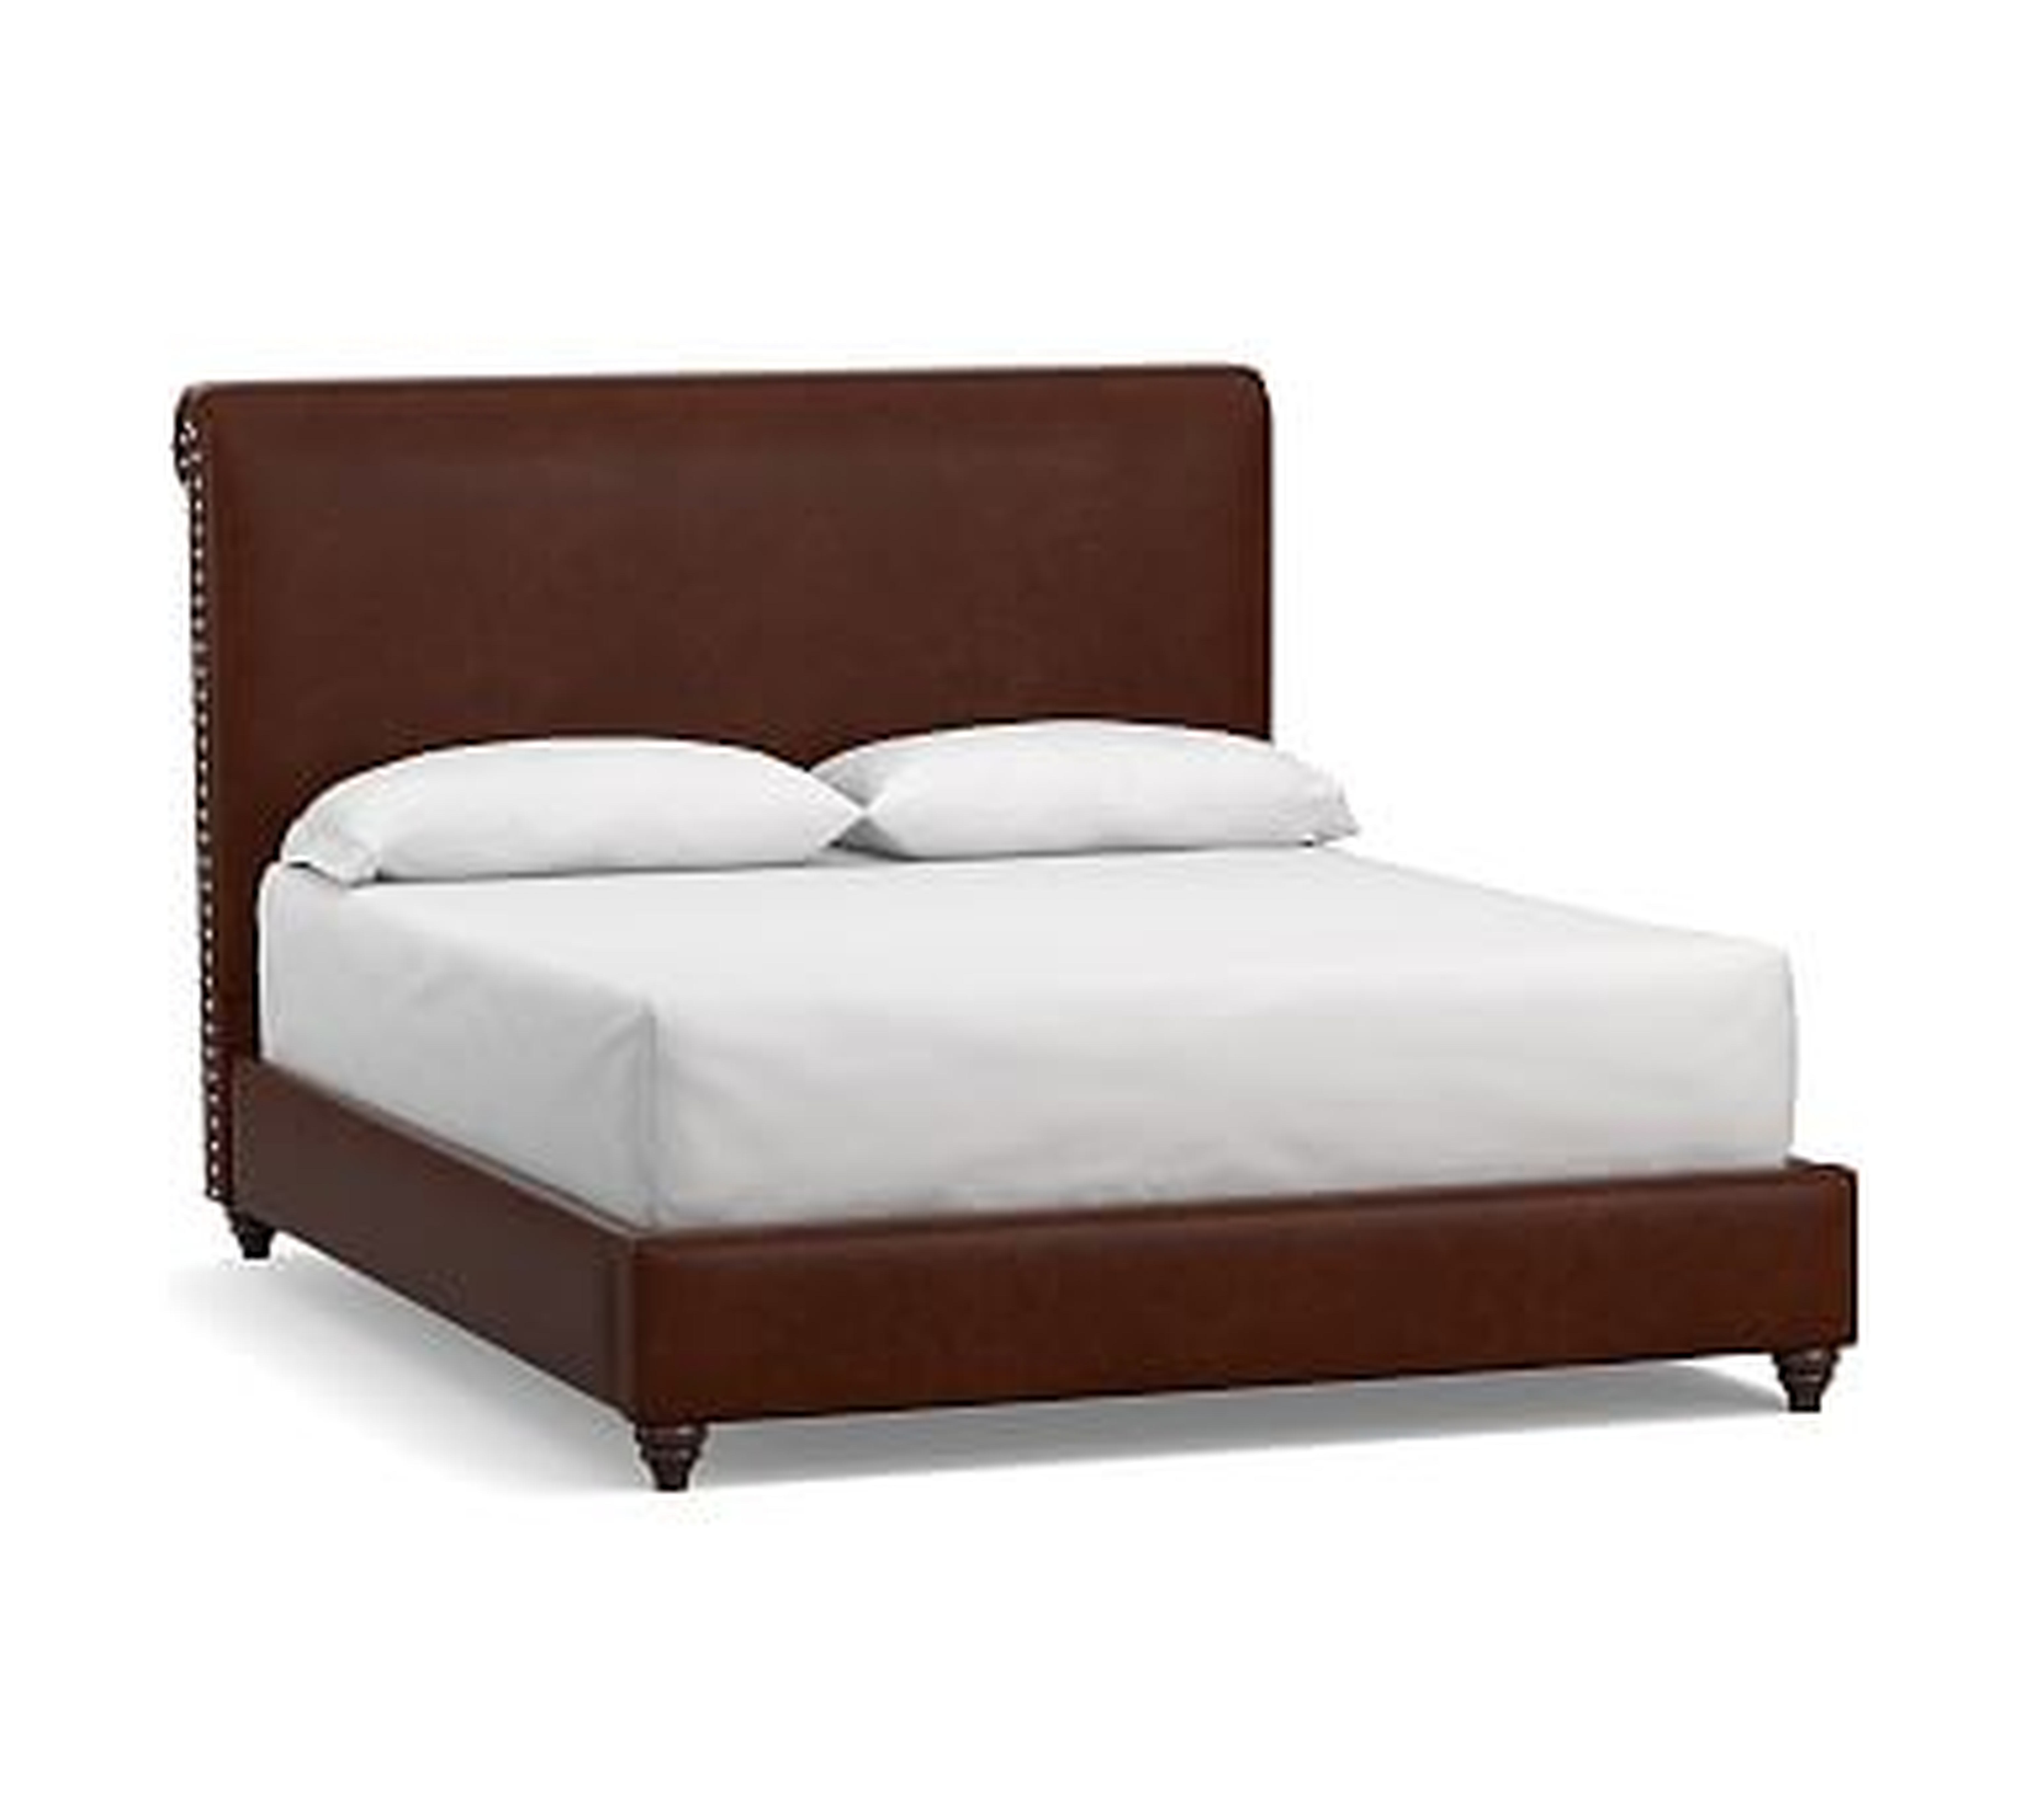 Chesterfield Non-Tufted Leather Bed with Bronze Nailheads, King, Statesville Espresso - Pottery Barn